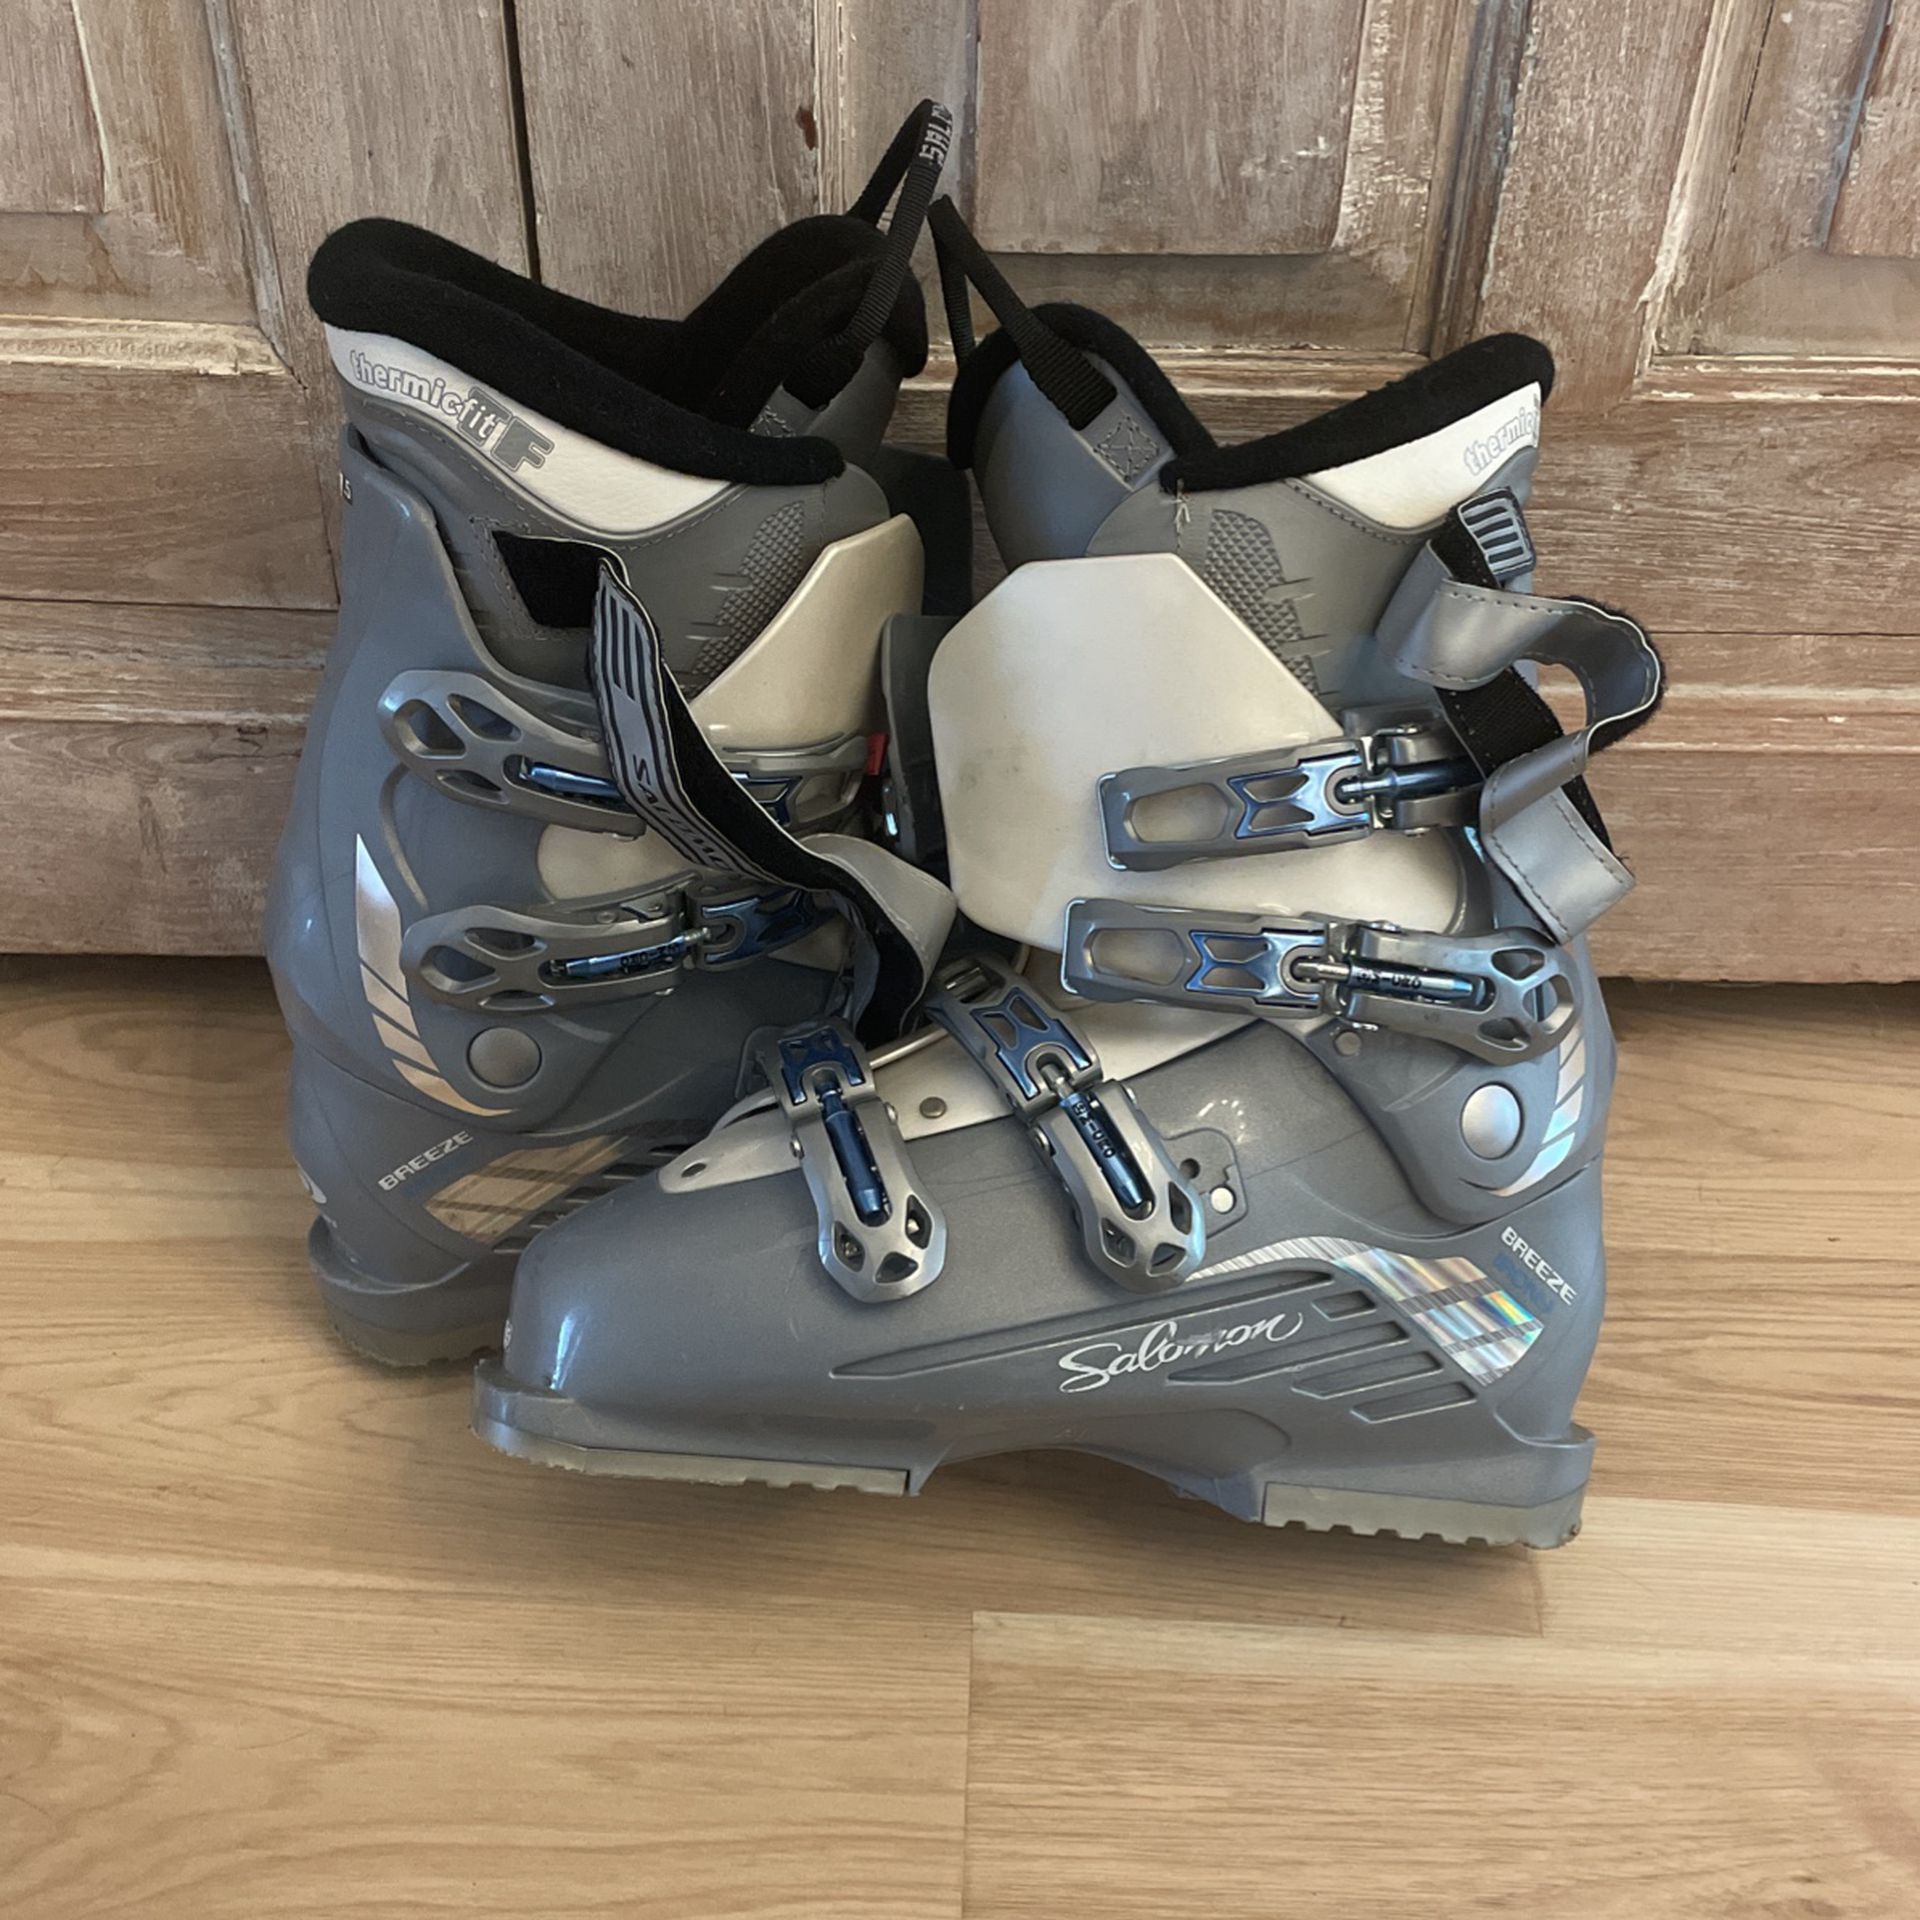 Barely Used, Excellent Condition Salomon Ski Boots